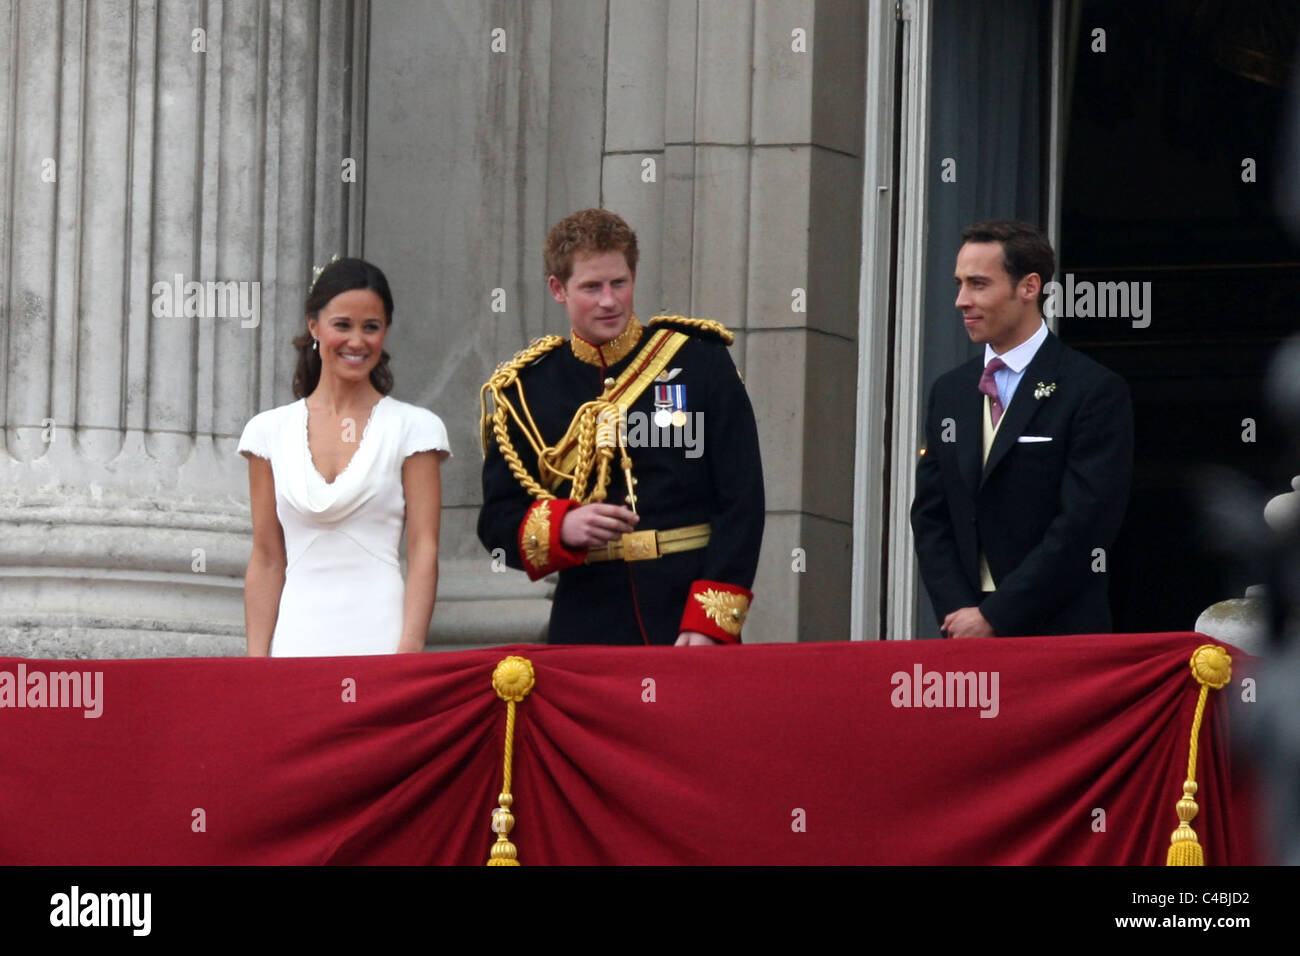 PIPPA MIDDLETON AND PRINCE HARRY AT THE ROYAL WEDDING OF PRINCE WILLIAM AND KATE MIDDLETON Stock Photo